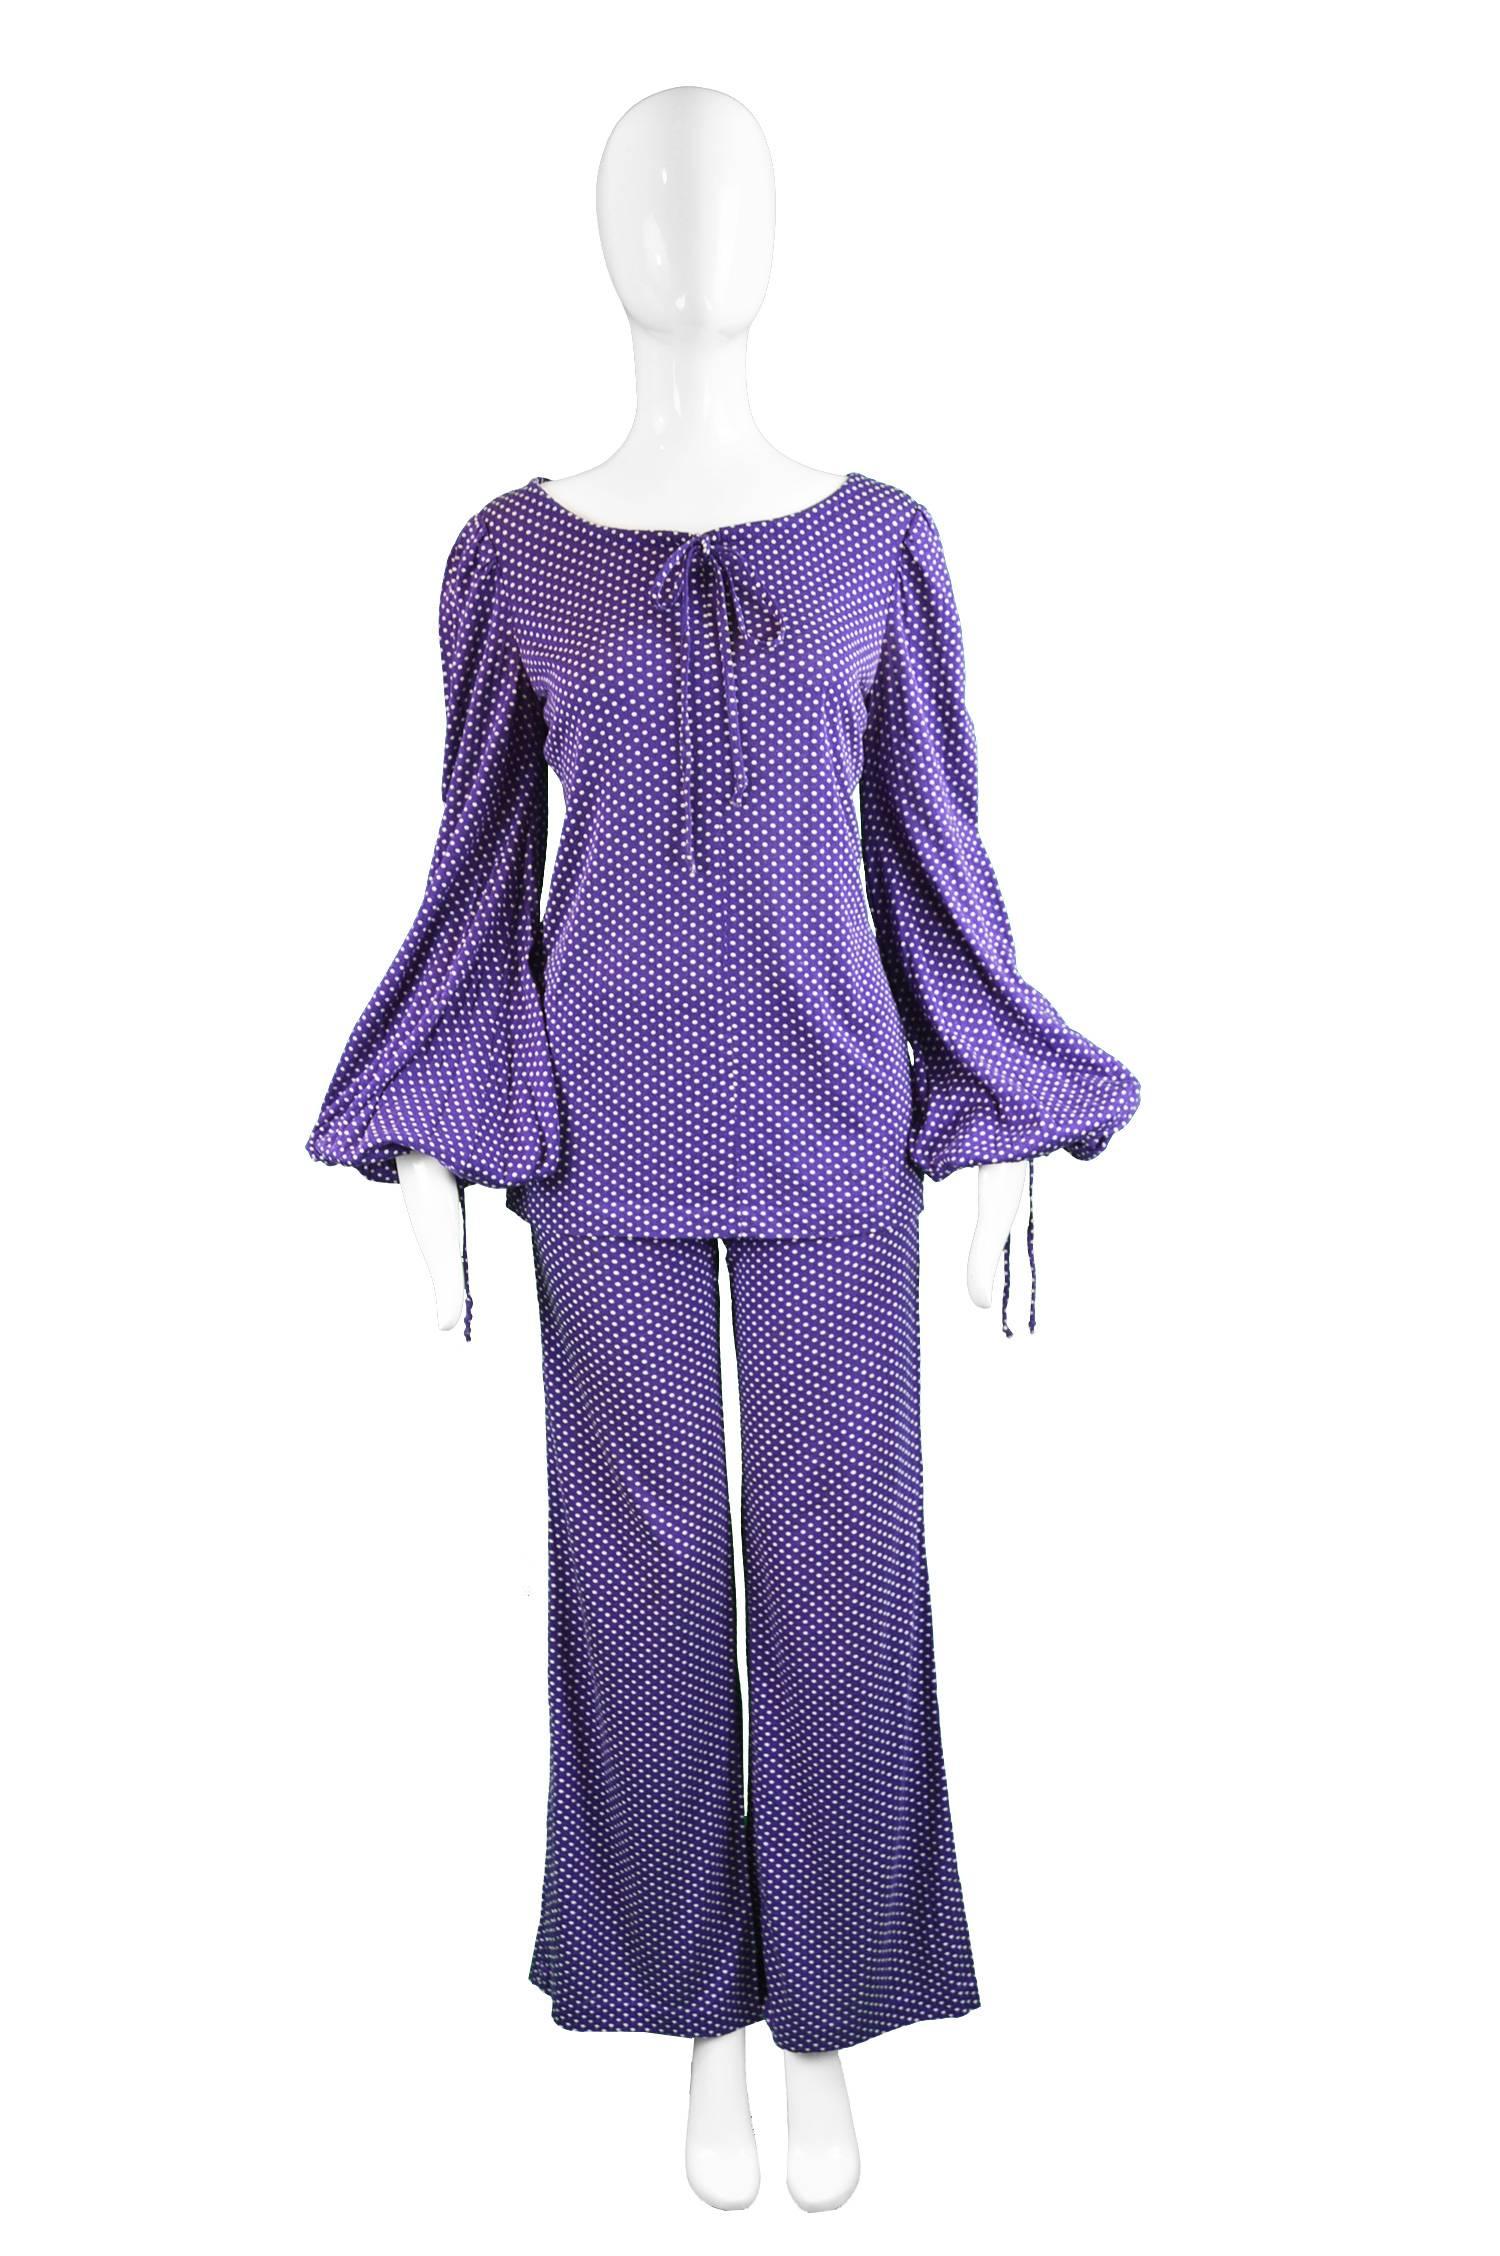 An incredibly rare and highly collectable original vintage two piece pant suit from the early 70s by legendary British label, Biba. In a stretchy purple knit fabric with playful white spotty polka dot print throughout. The tunic top, which could be